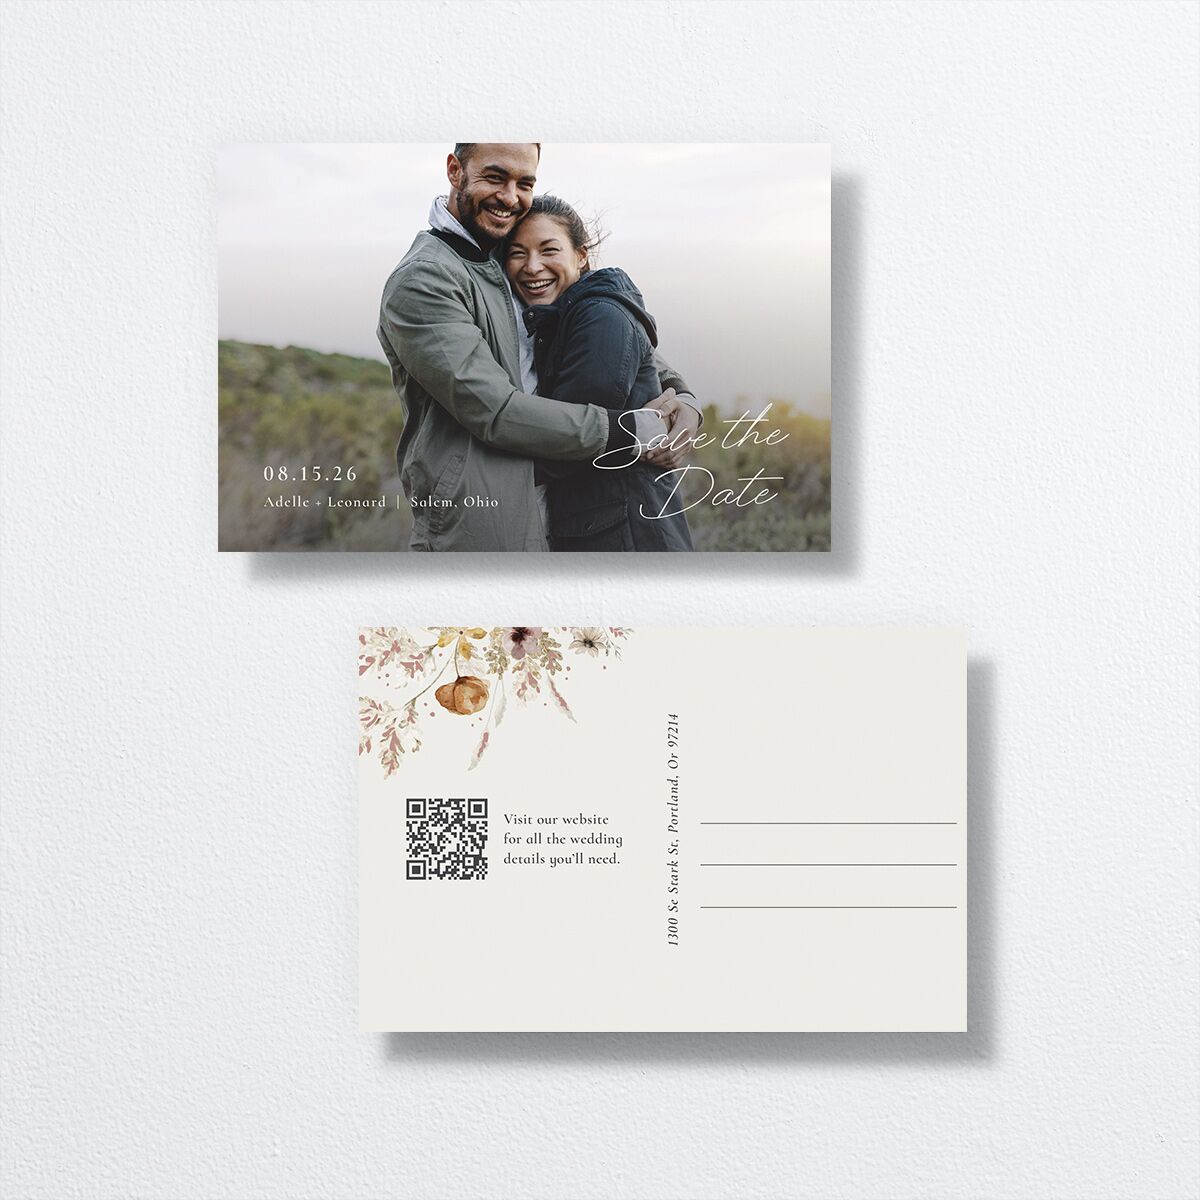 Dried Blooms Save the Date Postcards front-and-back